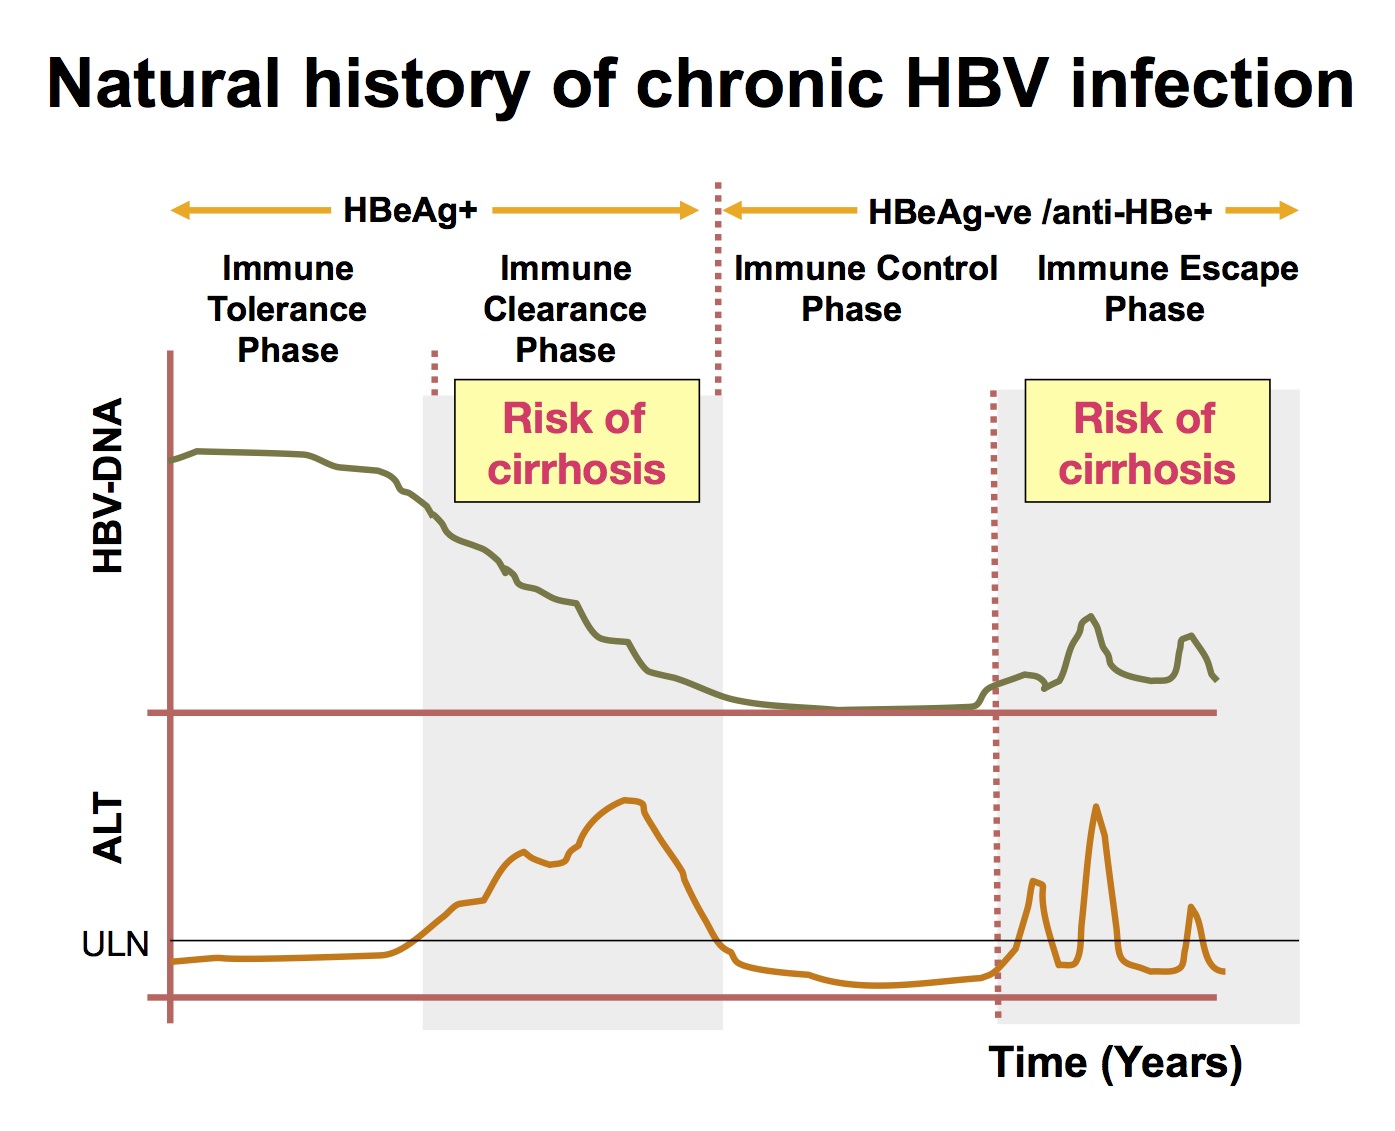 Chronic hepatitis B can be successfully treated